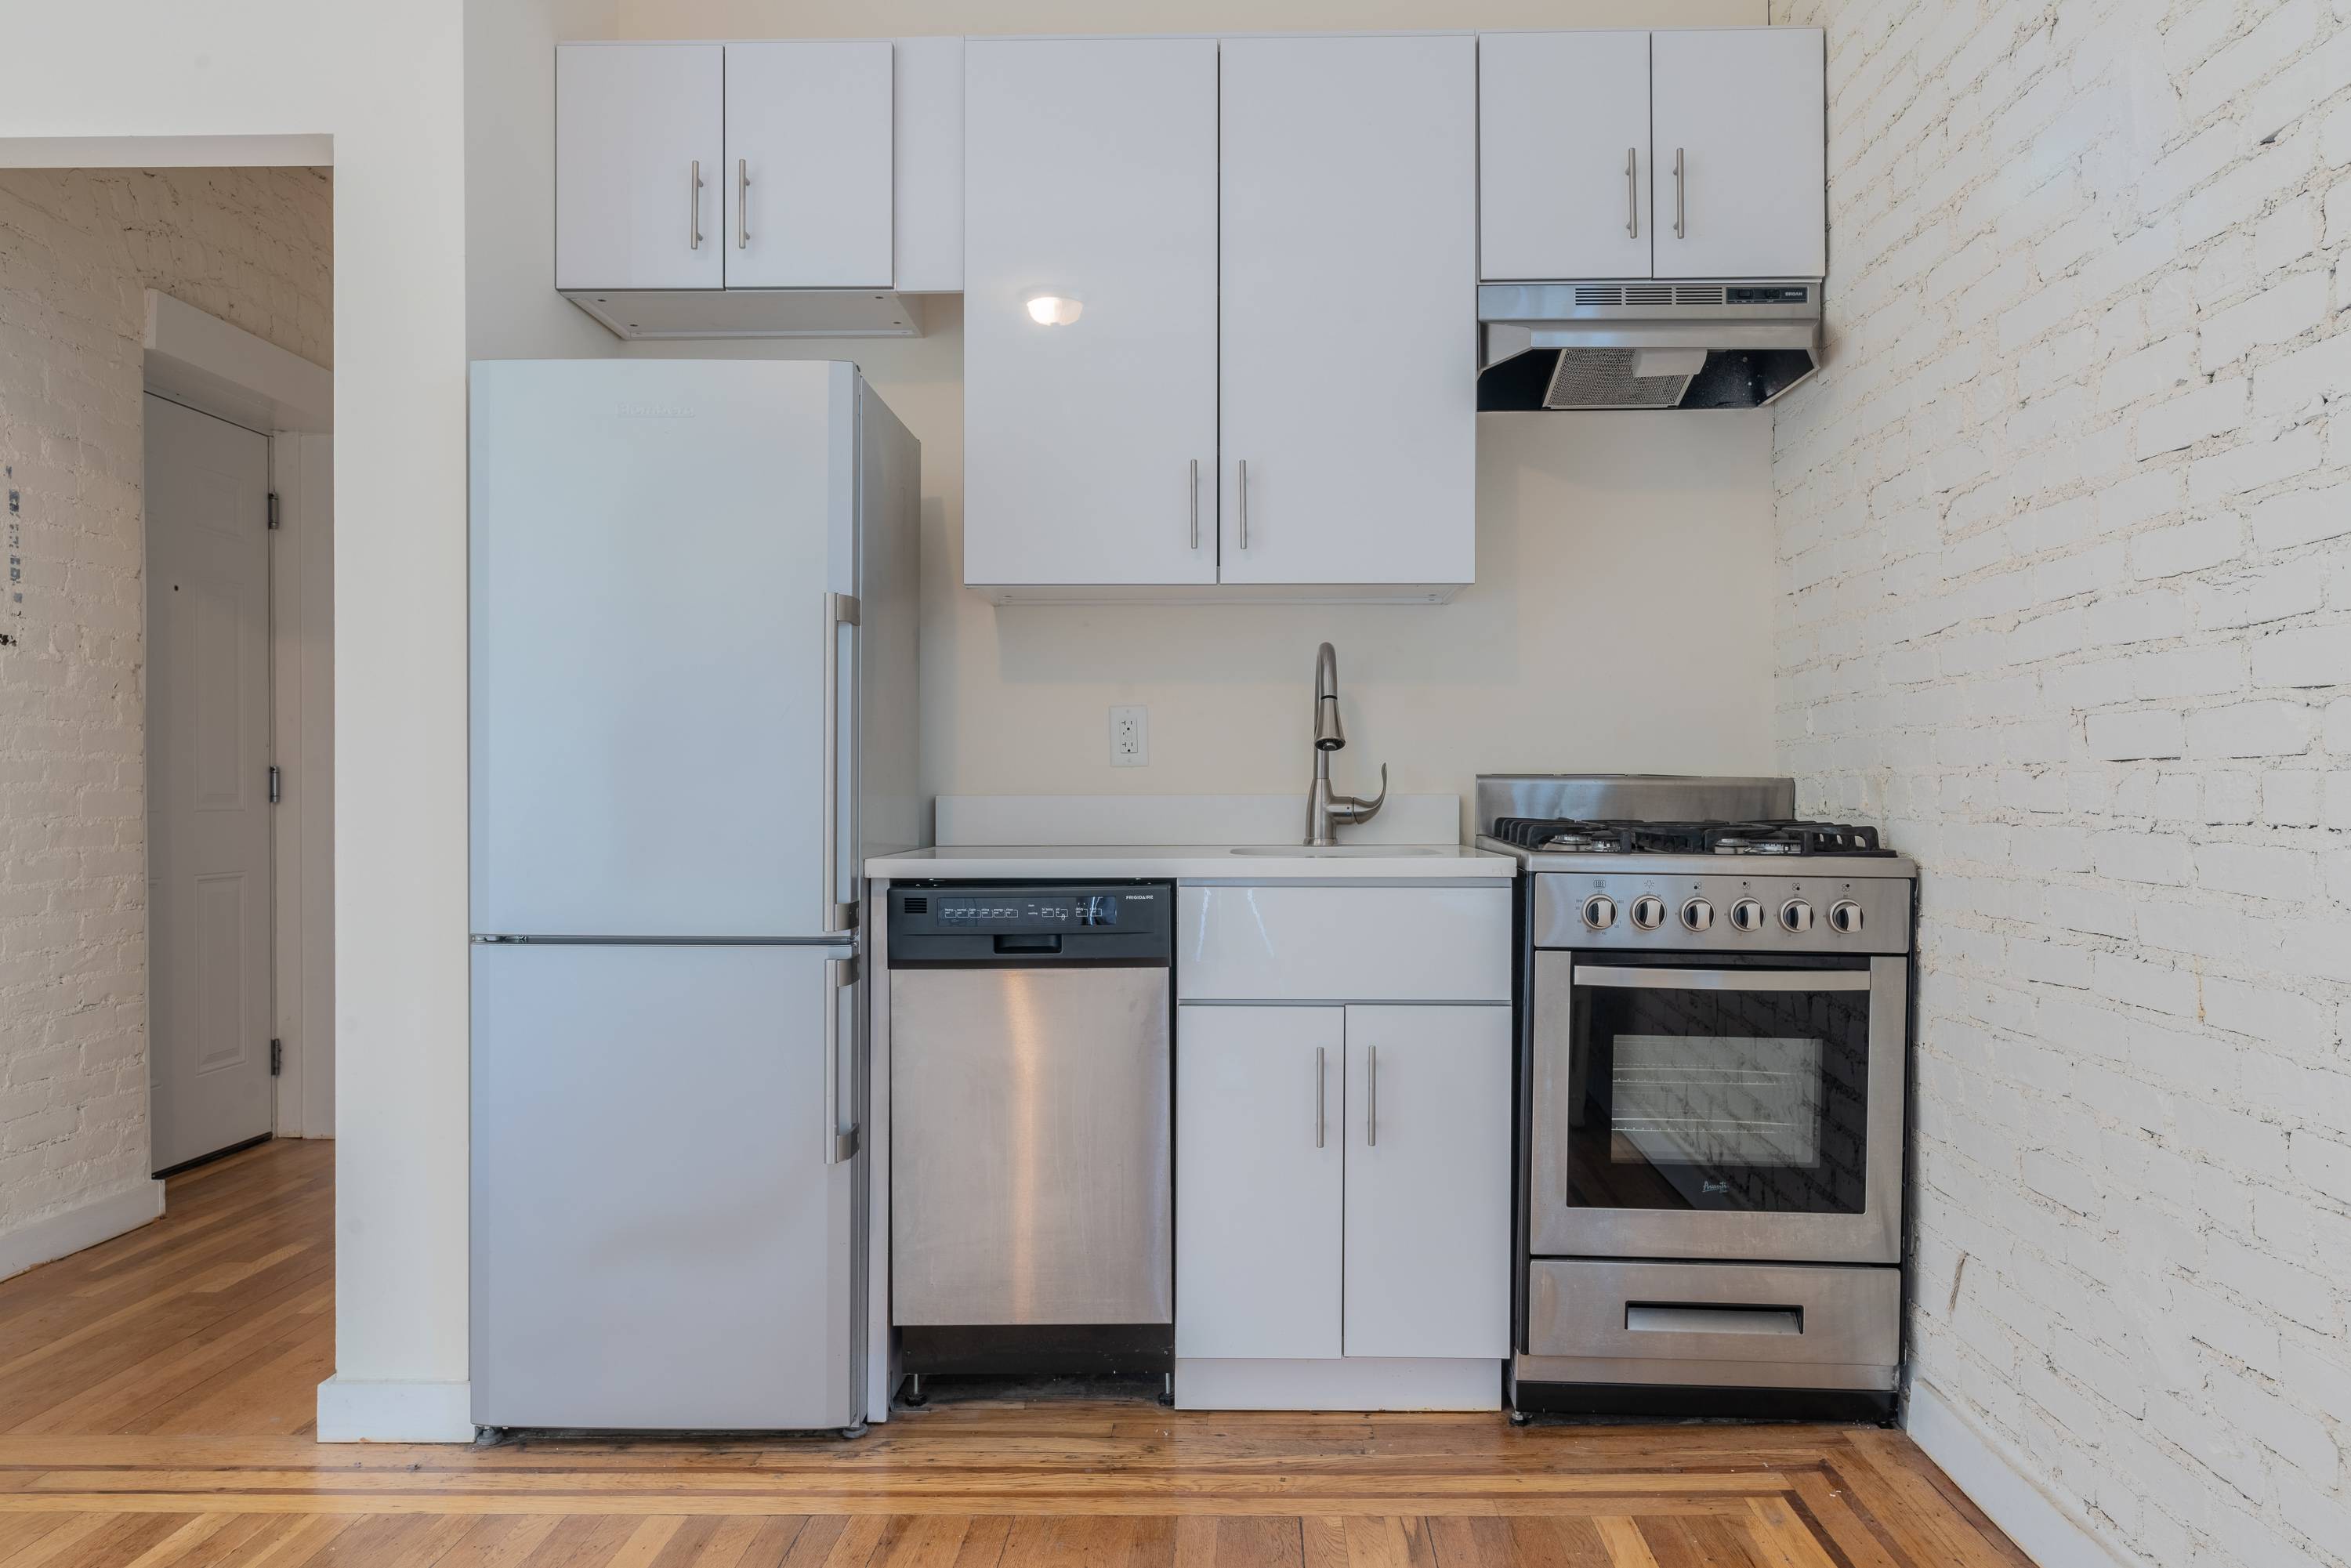 Luxury No Fee 1BR Apartment In Journal Square, Seconds to the Path Train to NYC! Laundry on Site!